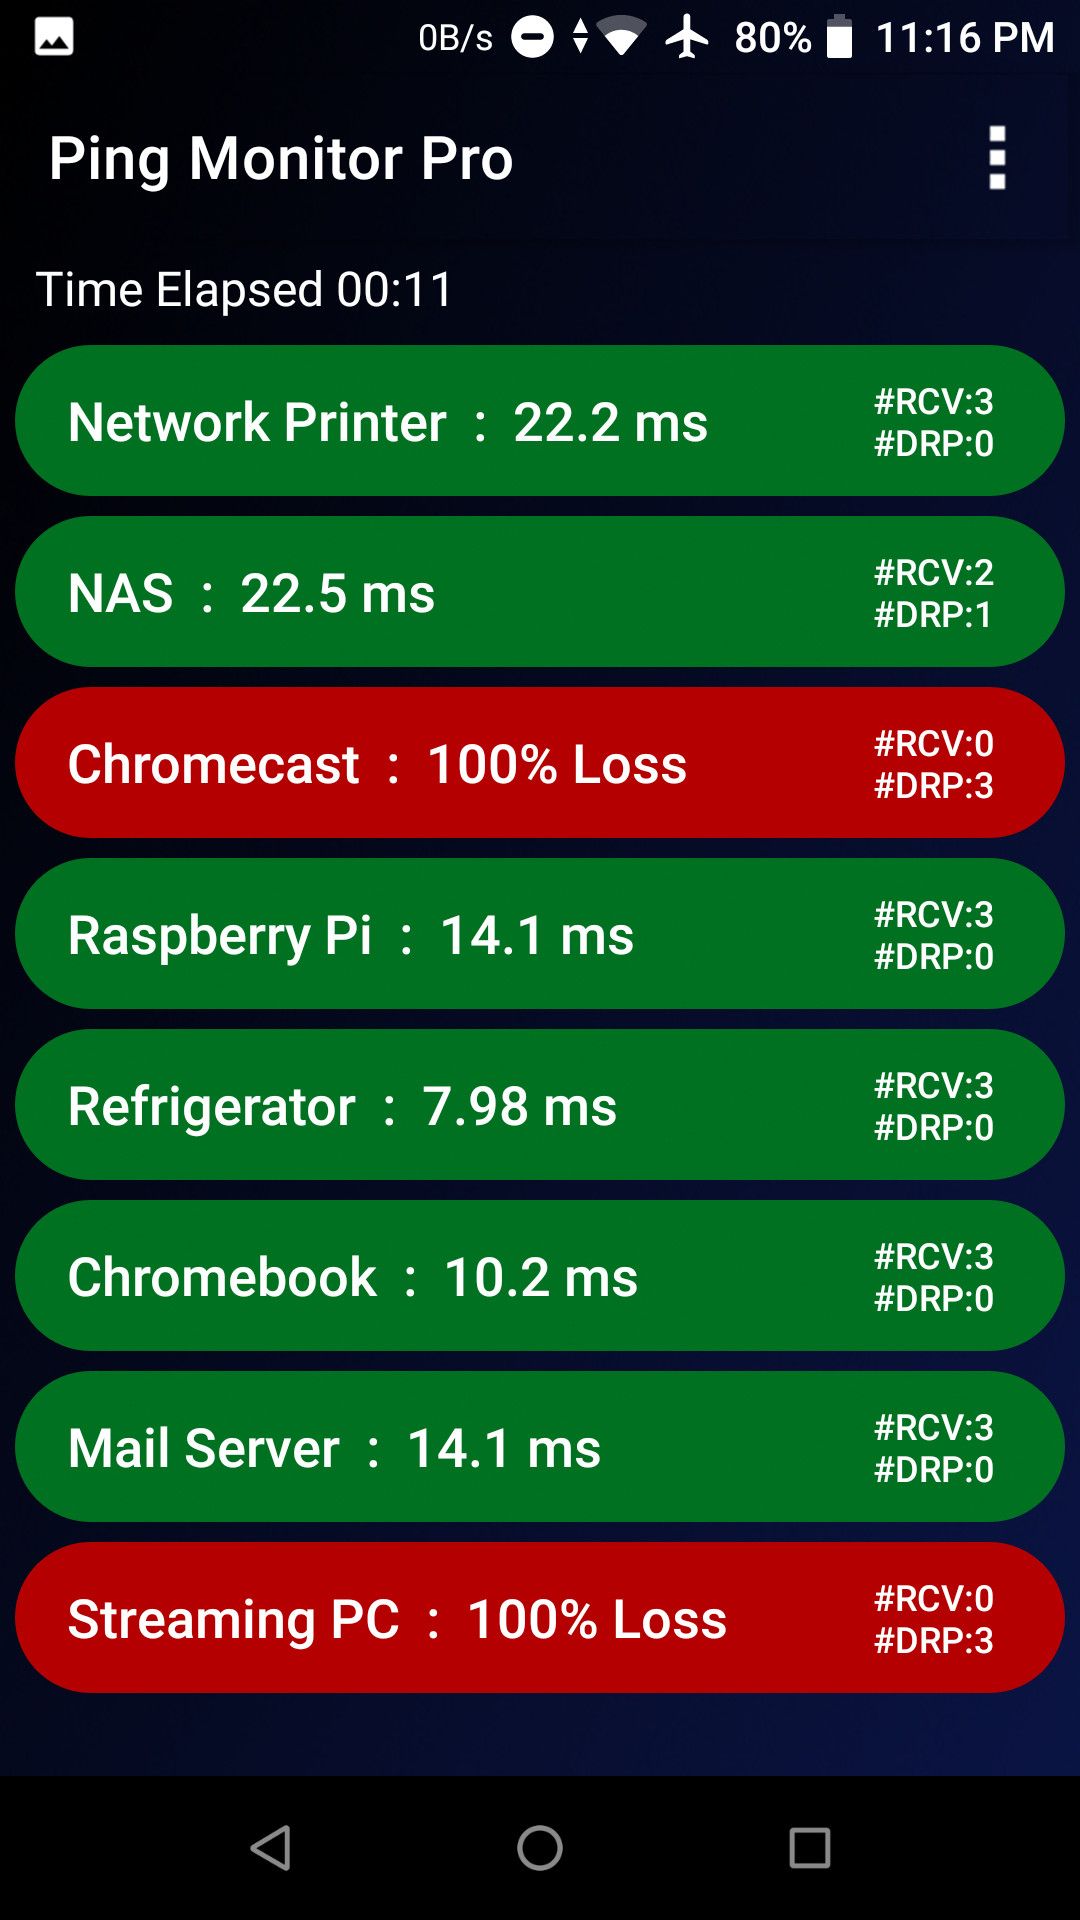 Ping monitor pro showing status of different network devices